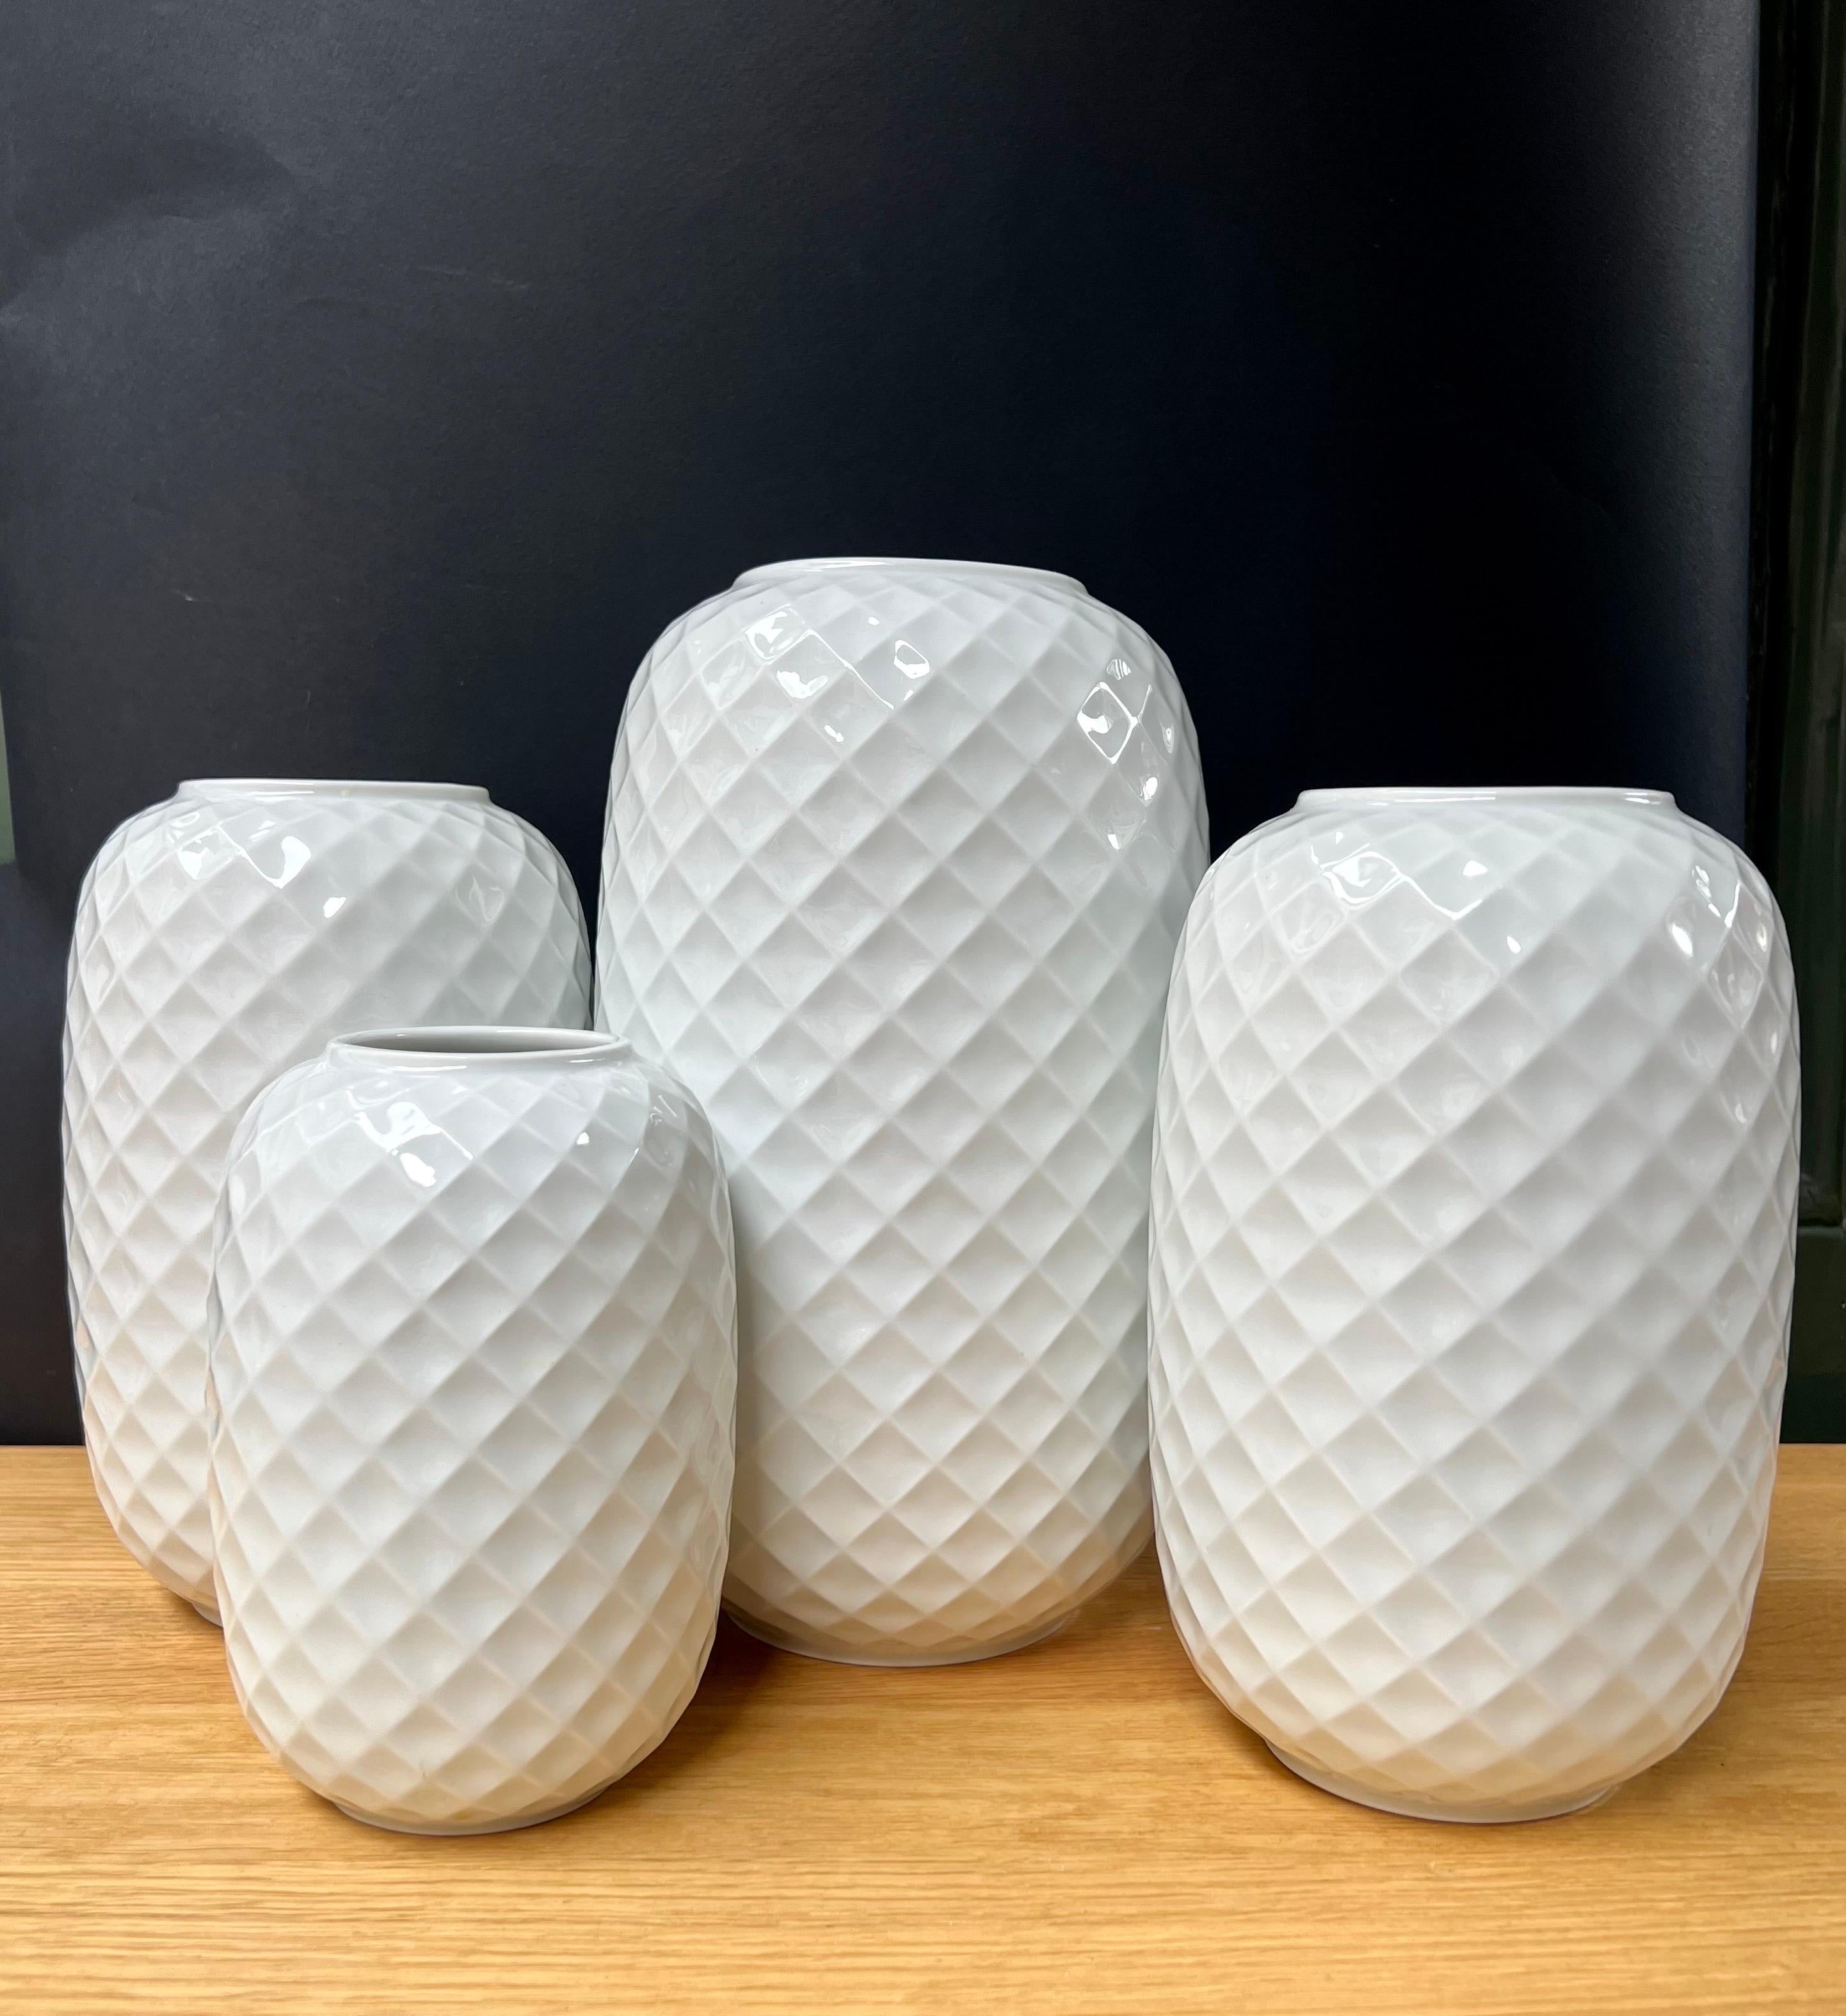 Mid-Century Modern Set of 4 Holiday Vases, White Honeycomb Relief., Porcelain, Thomas/Germany 1960 For Sale